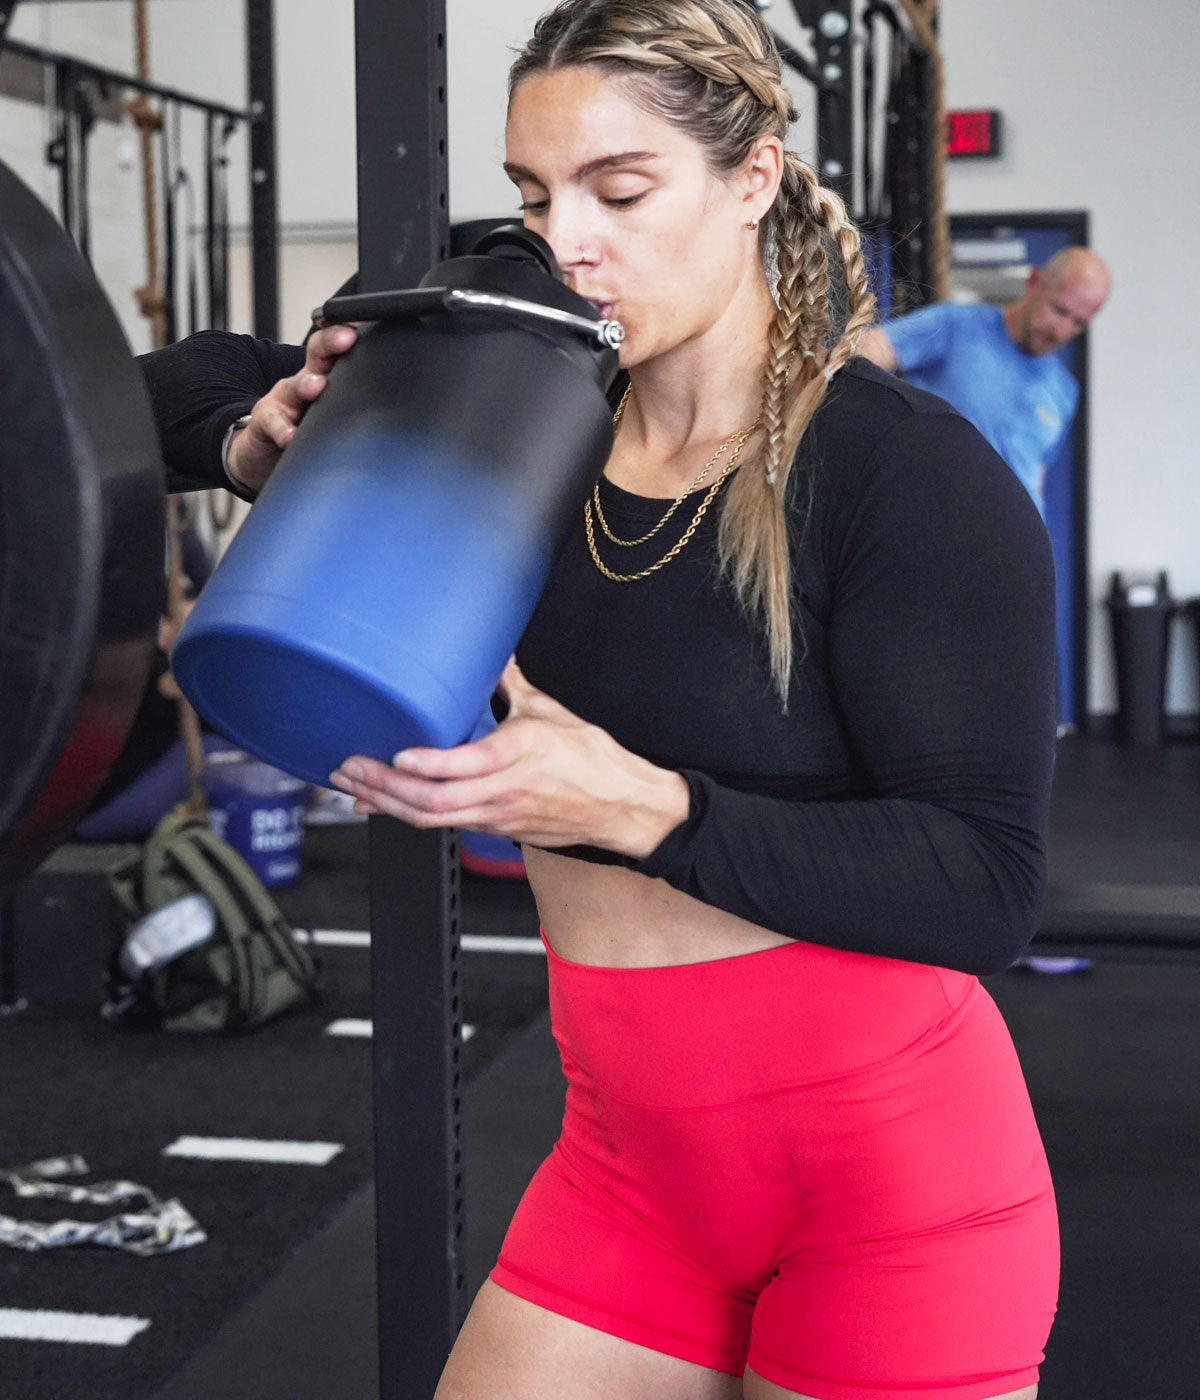 A woman who has been working out takes a drink from a Navy Black Ombre-colored One Gallon Jug.